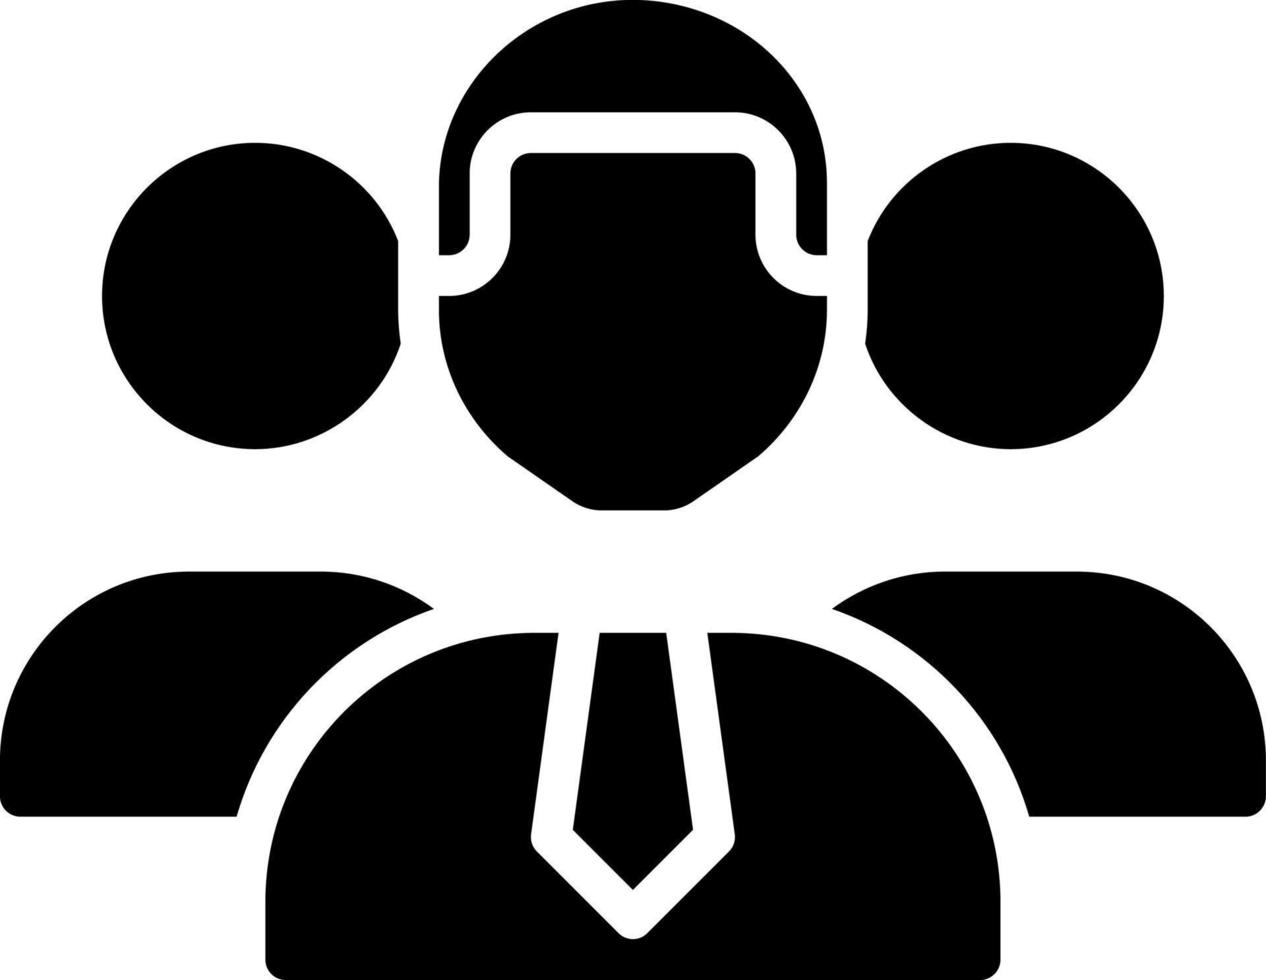 Personnel black glyph icon. Group of people working for company. Organization staff. Professional employees. Silhouette symbol on white space. Solid pictogram. Vector isolated illustration